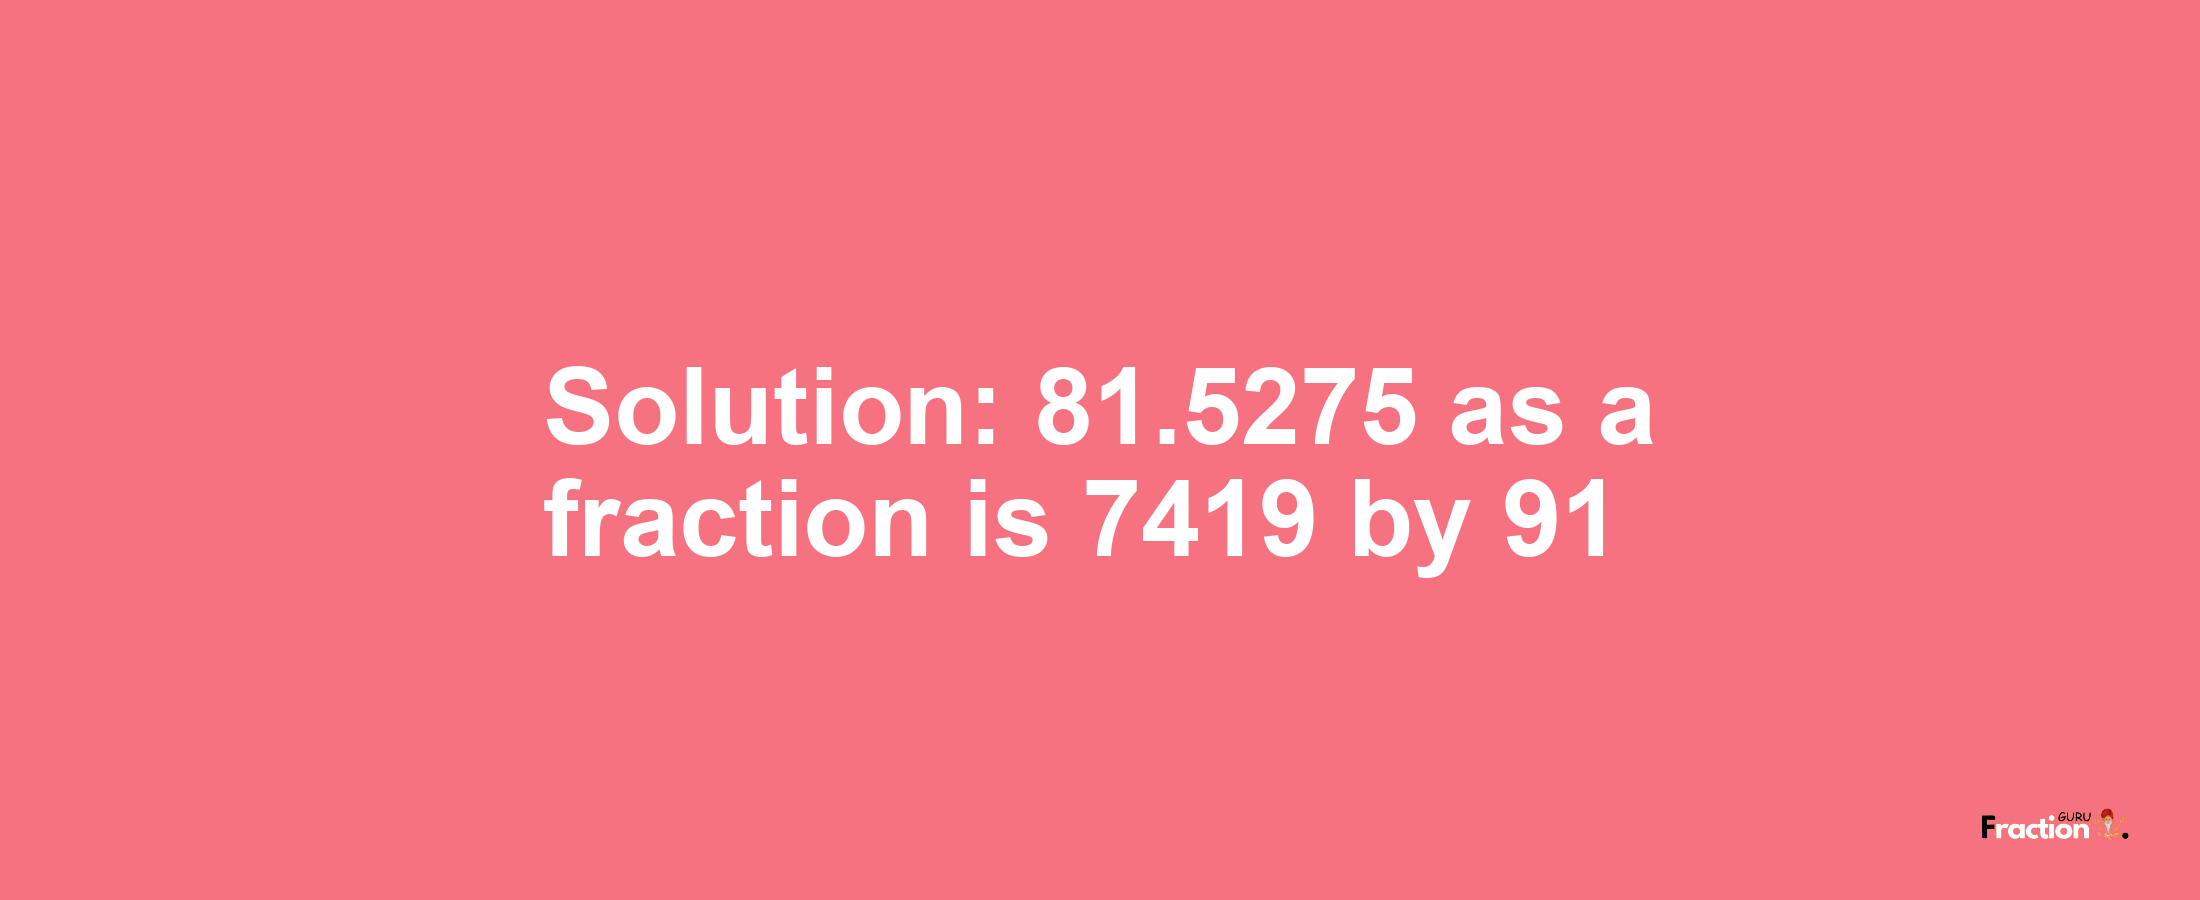 Solution:81.5275 as a fraction is 7419/91